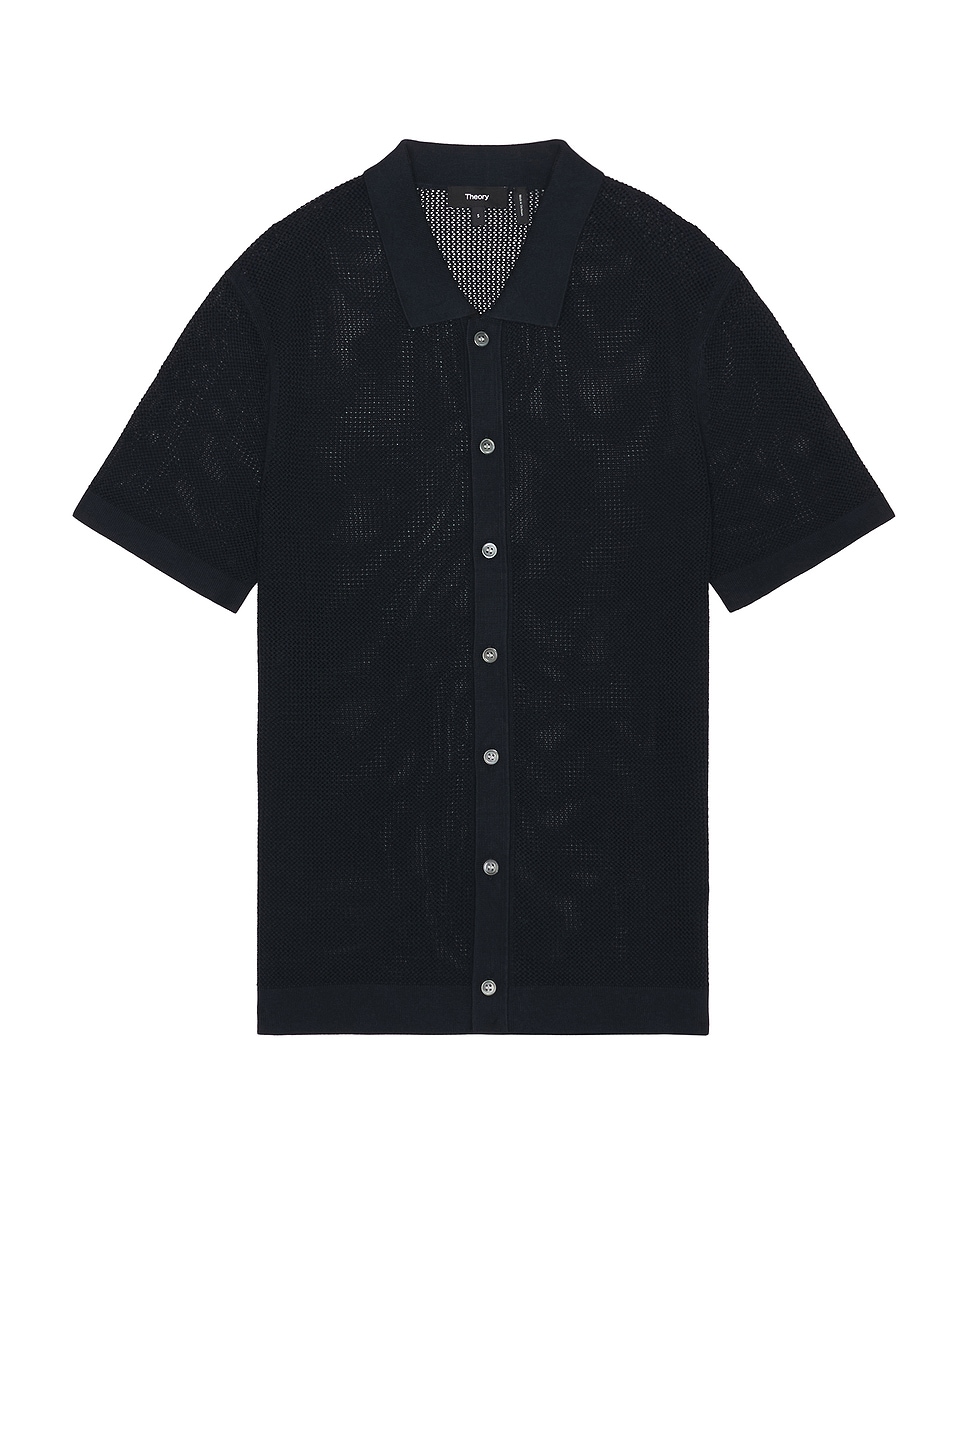 Image 1 of Theory Cairn Short Sleeve Shirt in Baltic